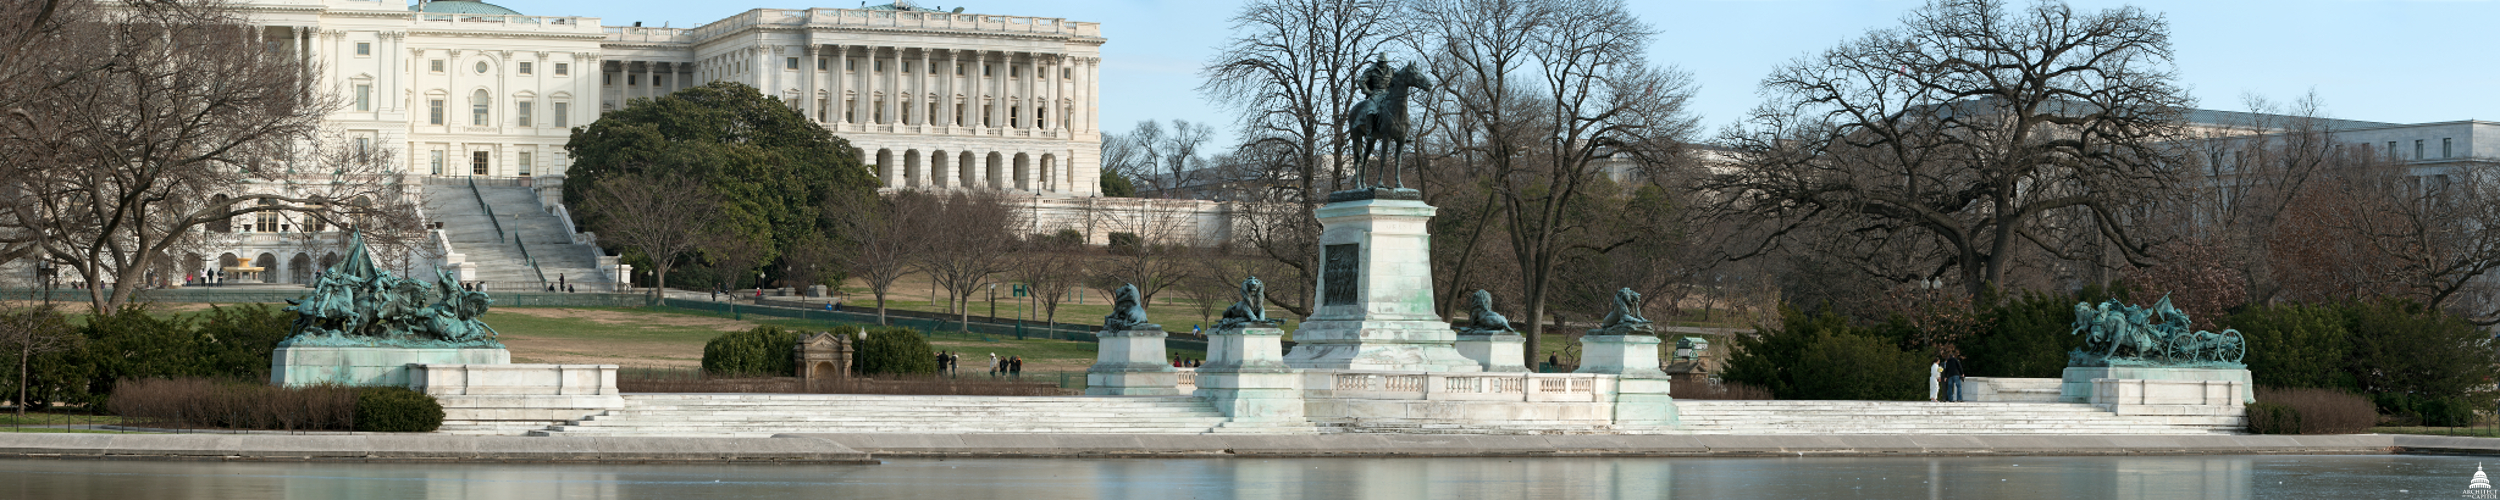 Panorama of the Grant Memorial and Capitol Reflecting Pool.